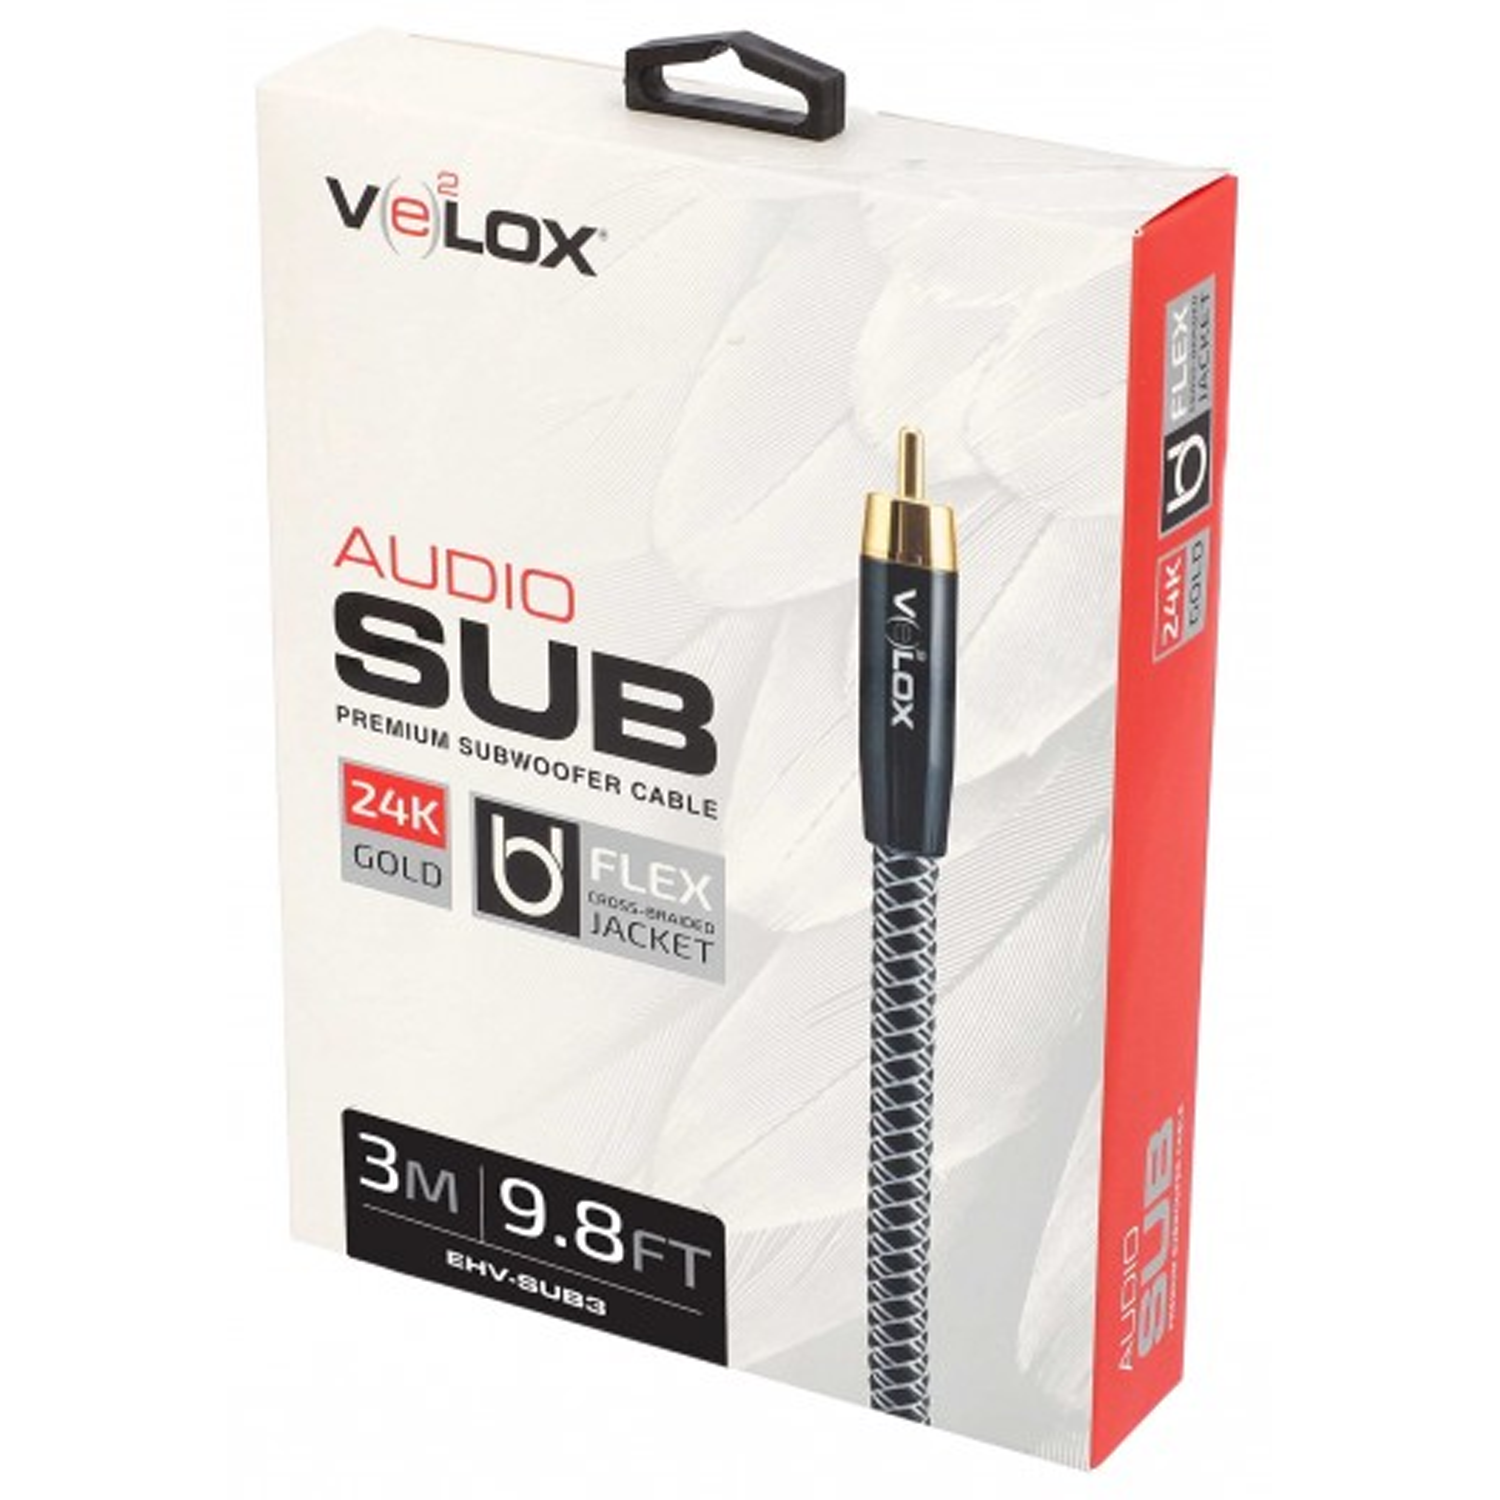 ETHEREAL EHV-SUB 10ft Velox Premium Subwoofer Cable